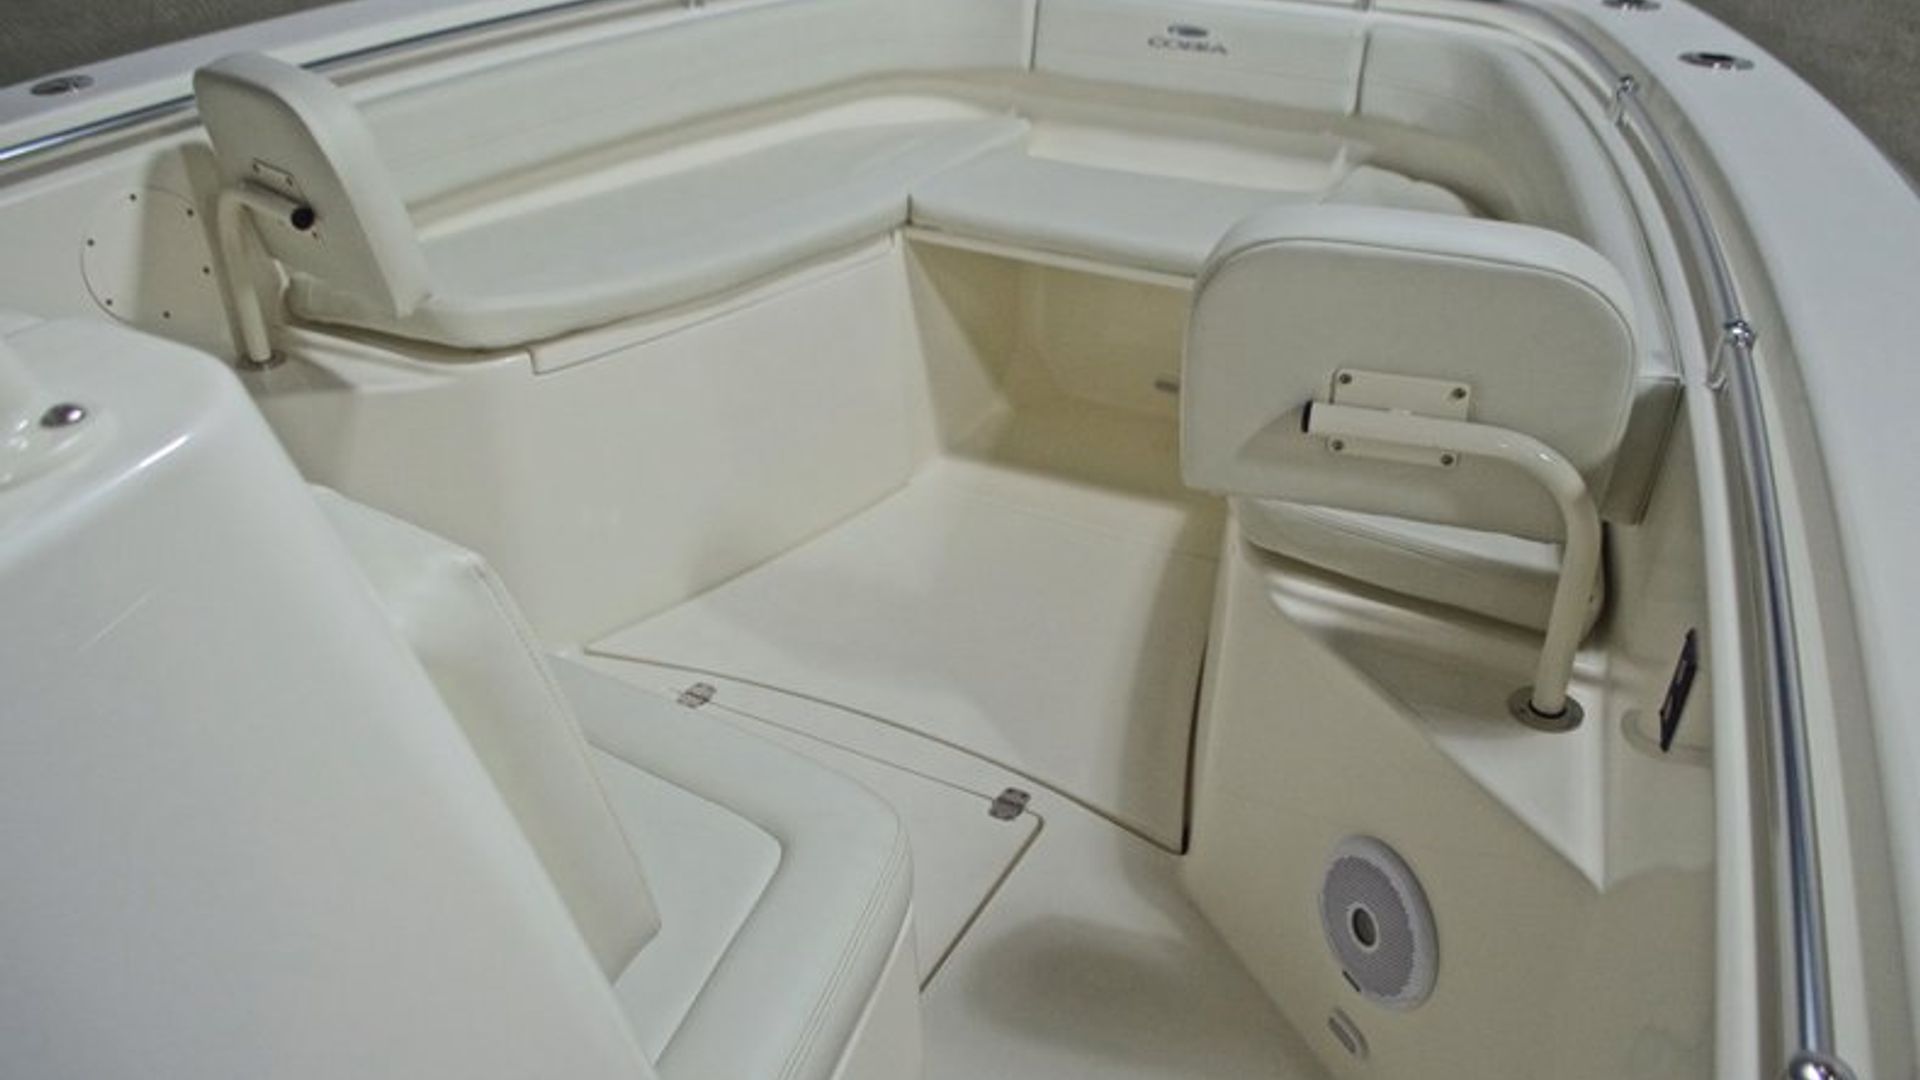 New 2017 Cobia 296 Center Console #N027 image 51